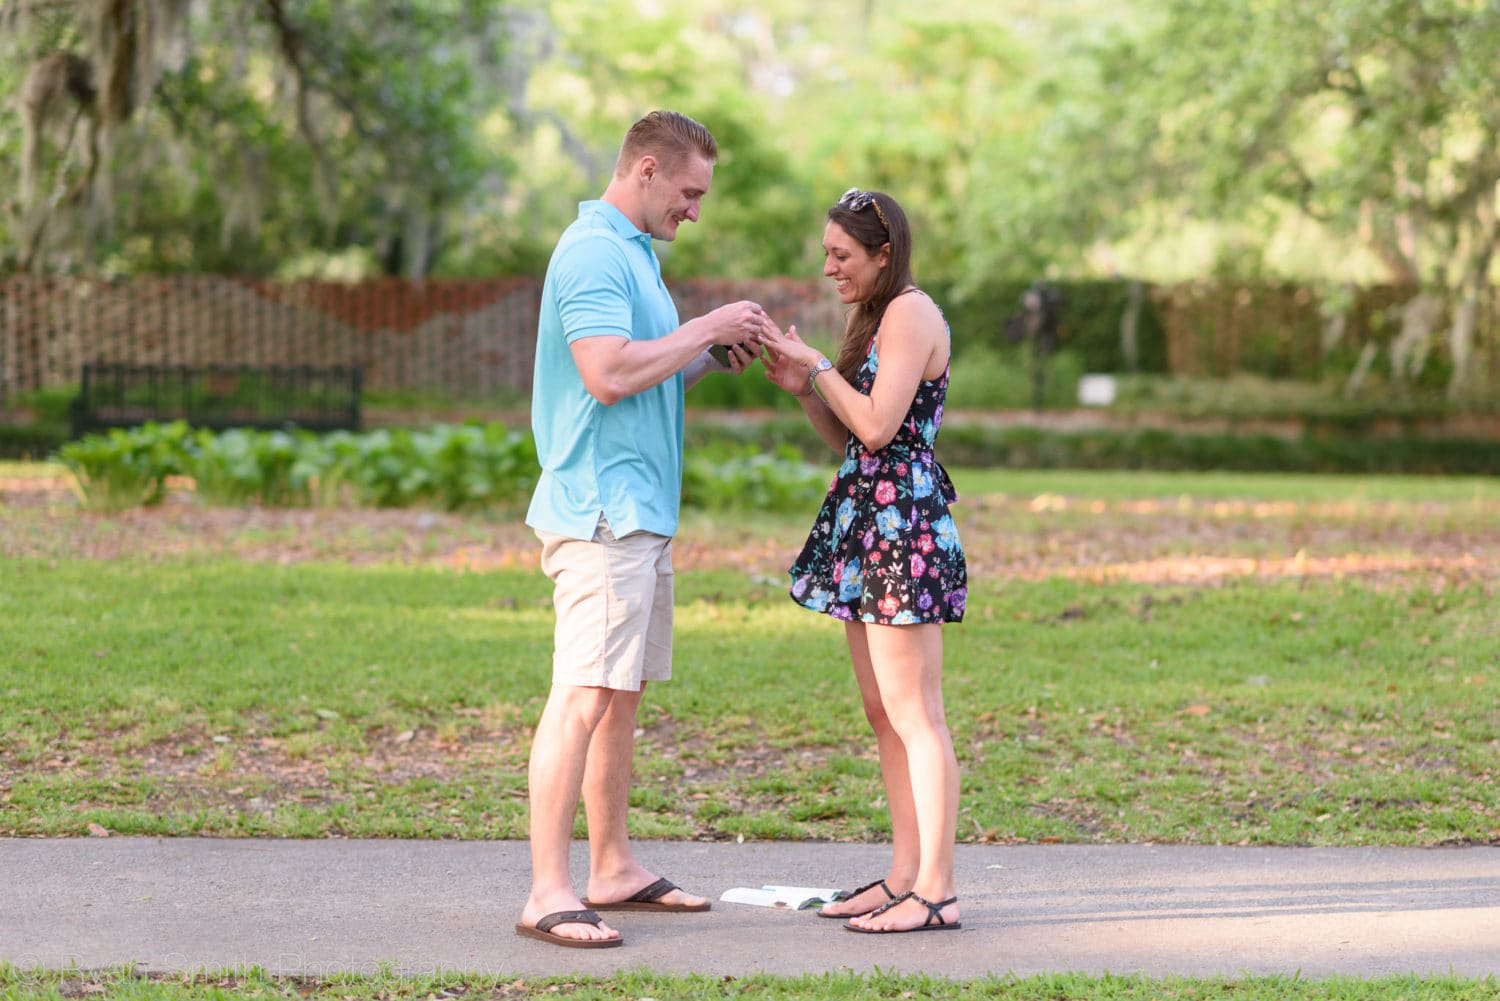 Putting on the ring after proposal - Brookgreen Gardens